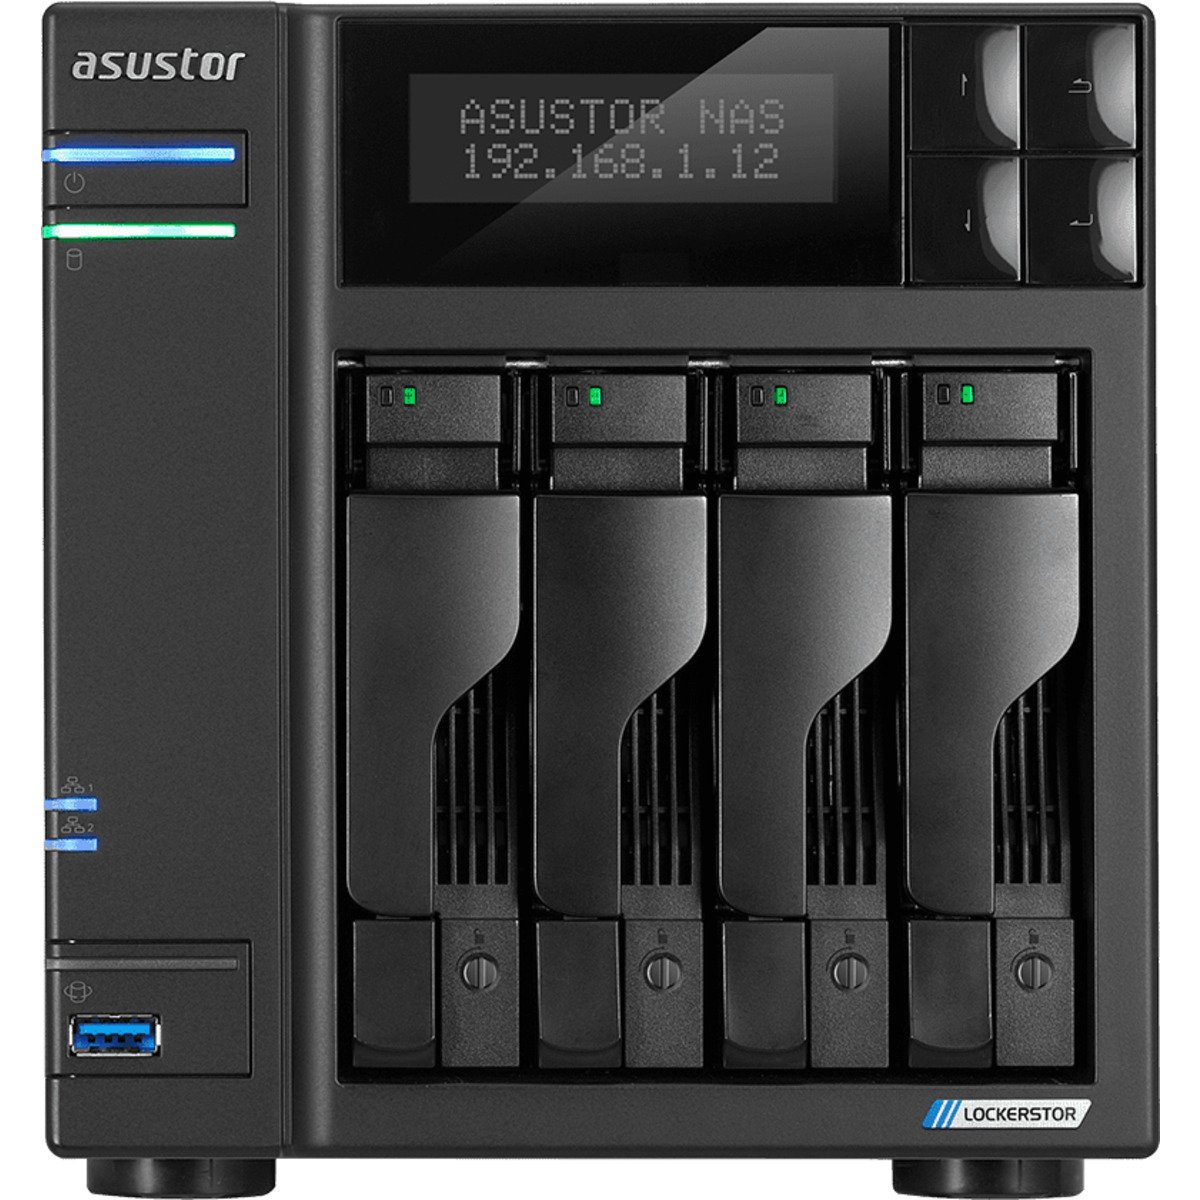 ASUSTOR AS6604T Lockerstor 4 64tb 4-Bay Desktop Multimedia / Power User / Business NAS - Network Attached Storage Device 4x16tb Seagate EXOS X18 ST16000NM000J 3.5 7200rpm SATA 6Gb/s HDD ENTERPRISE Class Drives Installed - Burn-In Tested - FREE RAM UPGRADE AS6604T Lockerstor 4